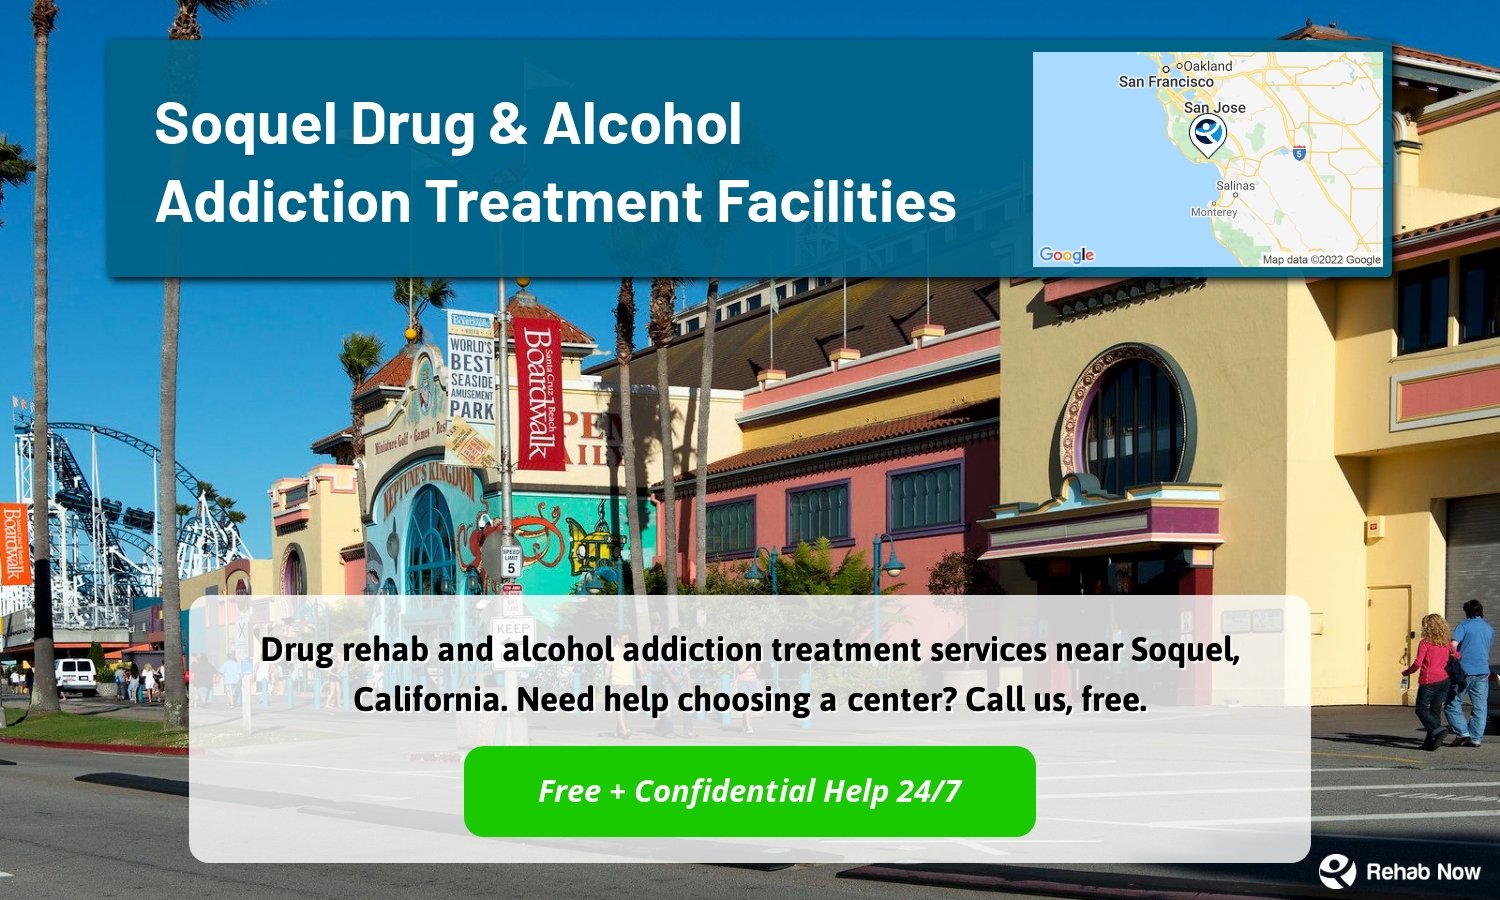 Drug rehab and alcohol addiction treatment services near Soquel, California. Need help choosing a center? Call us, free.